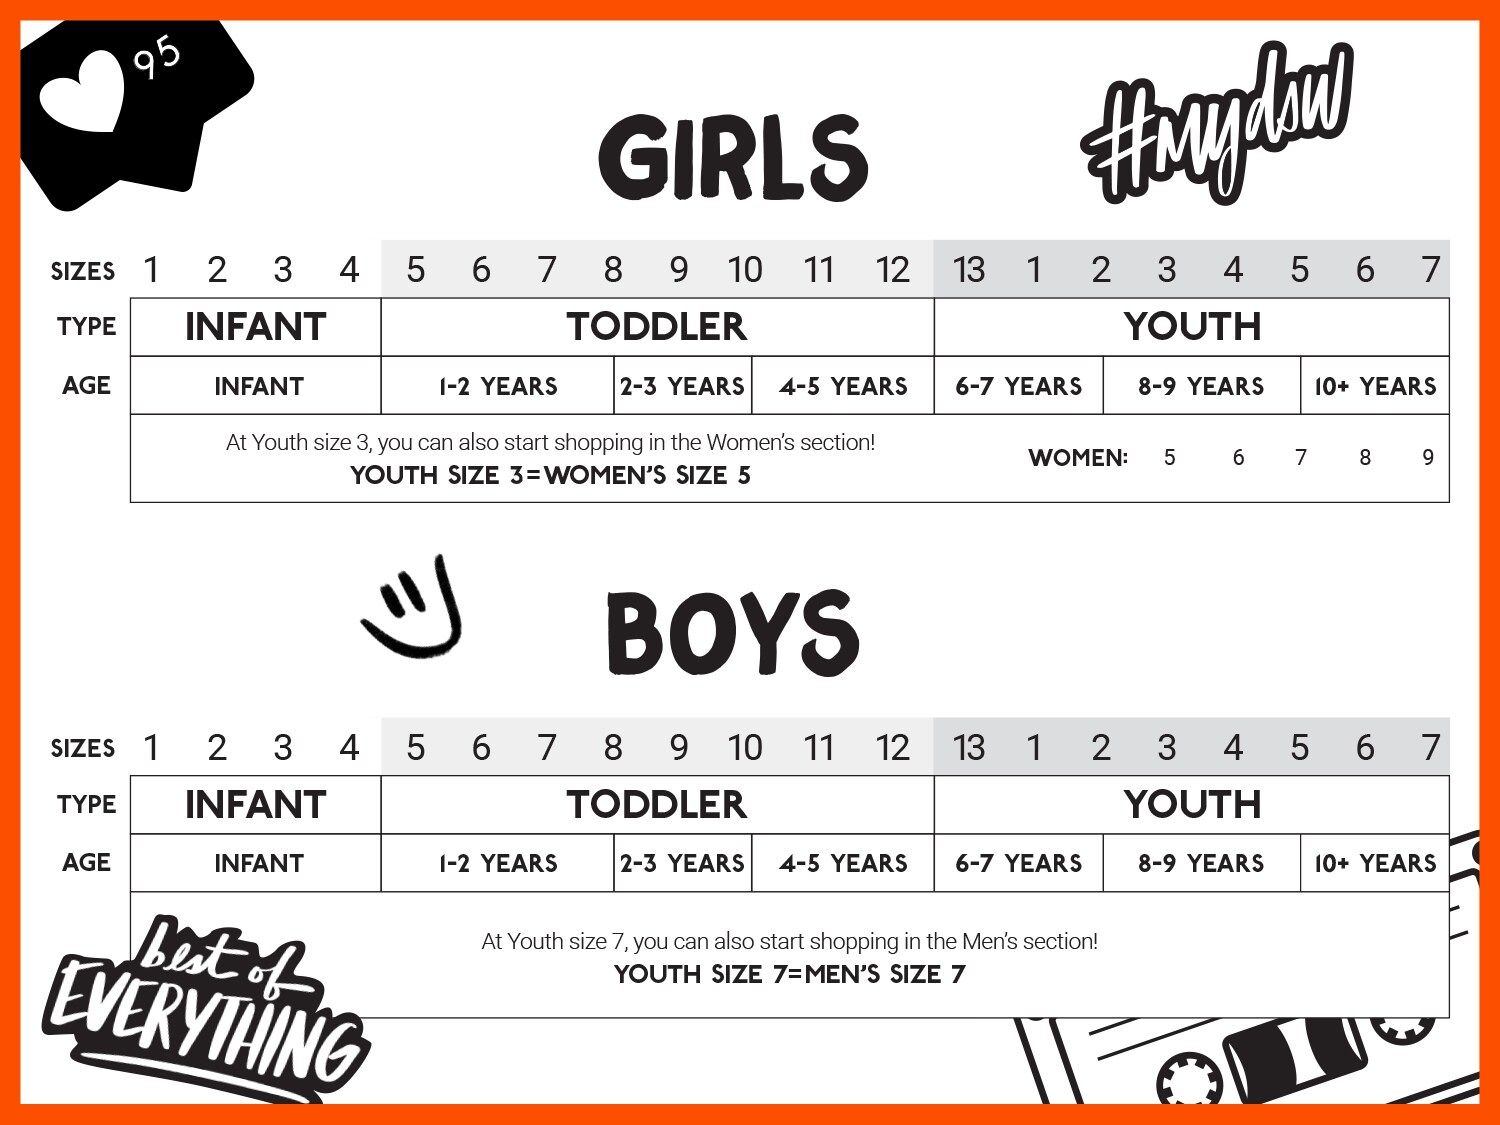 skechers youth size chart